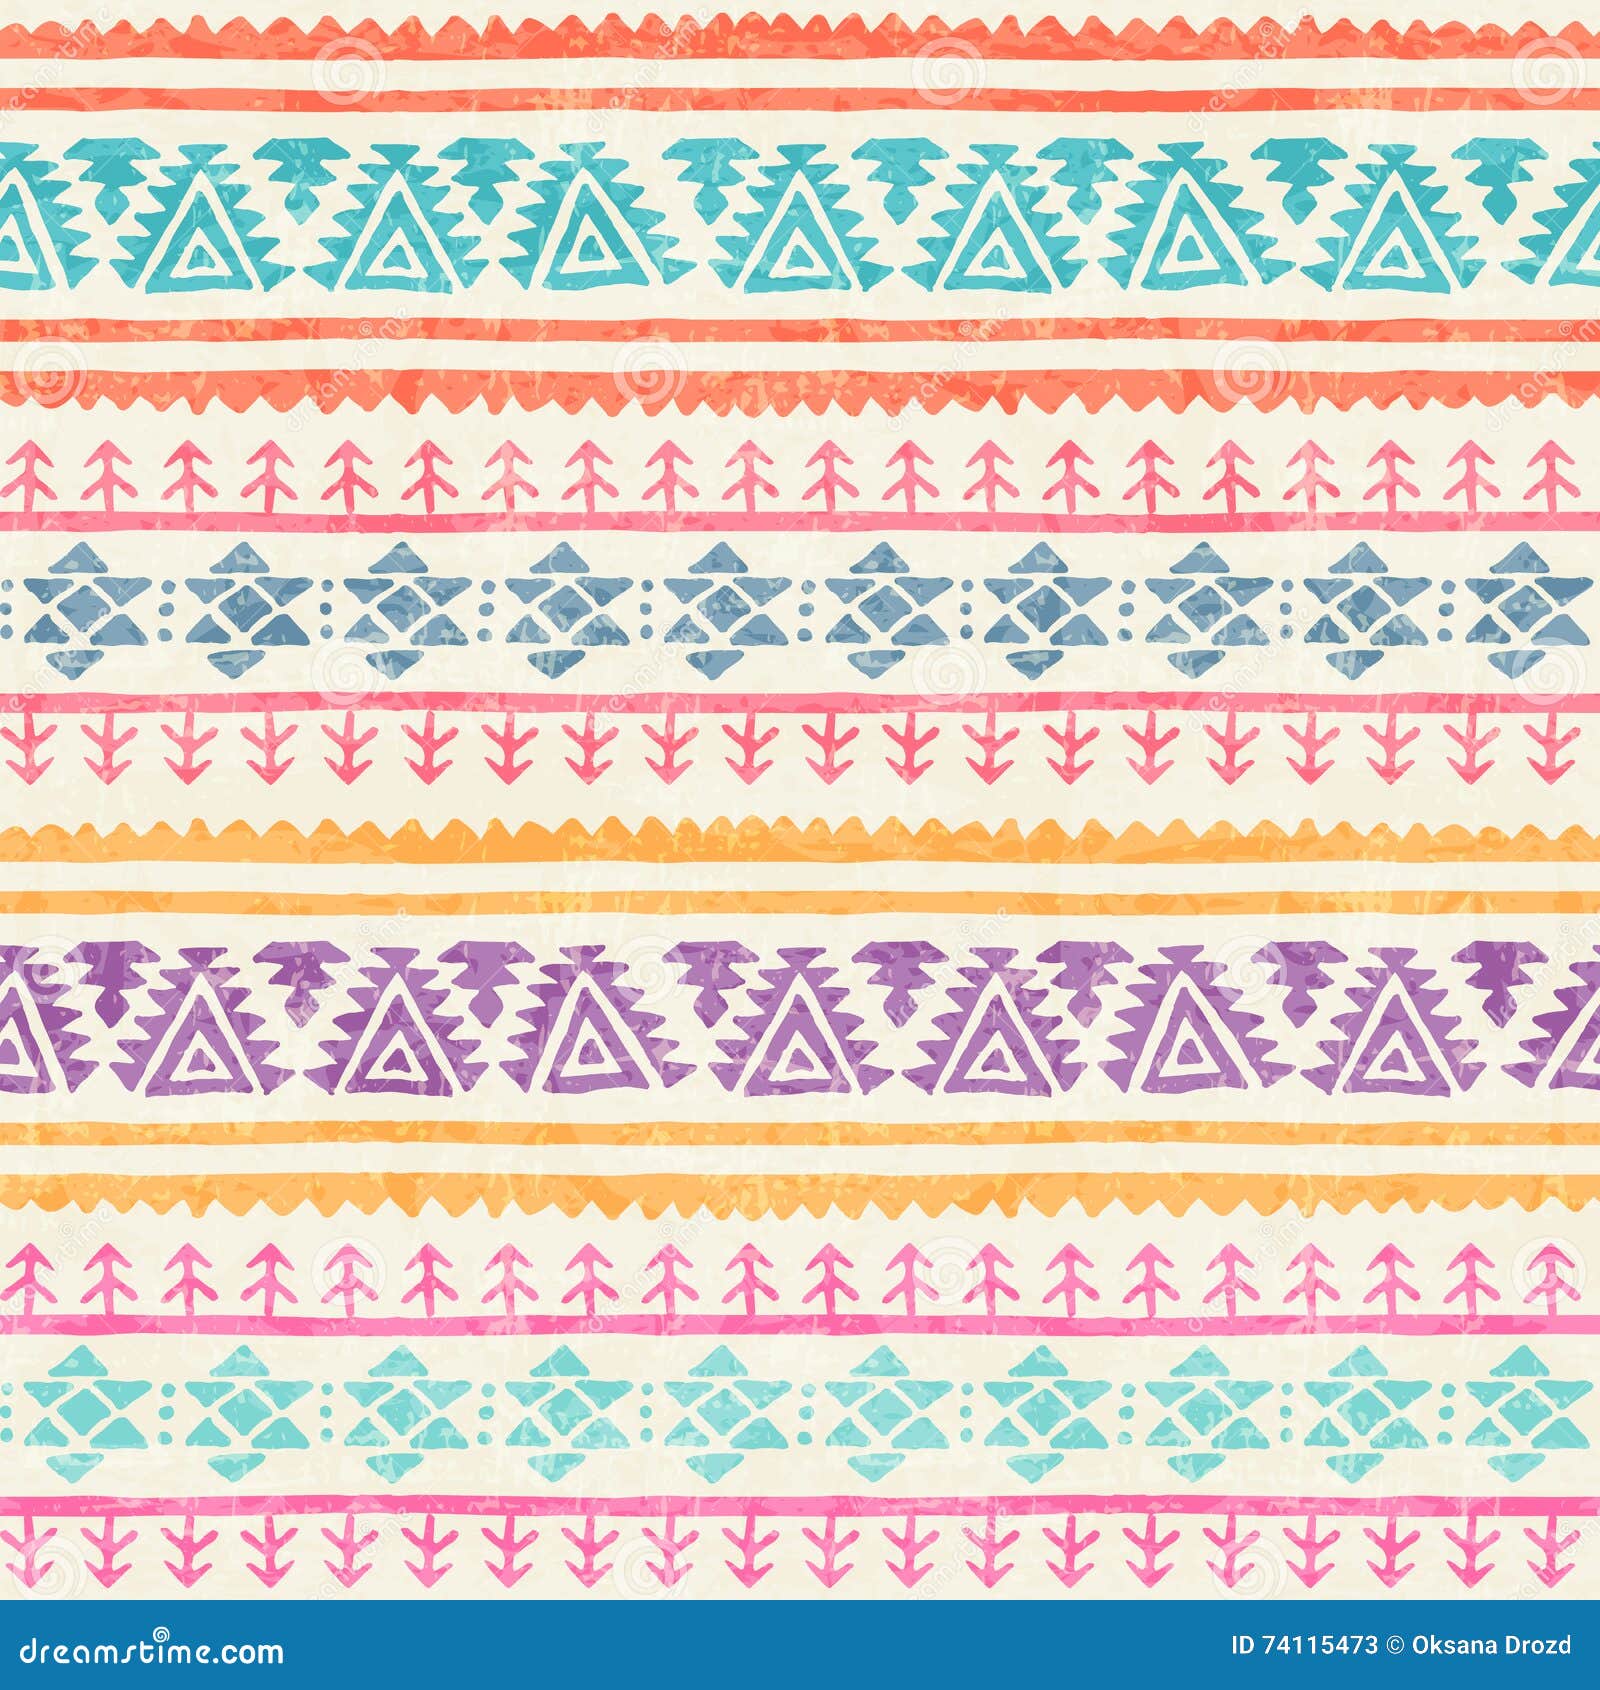 tribal seamless pattern with archaic geometric ornament